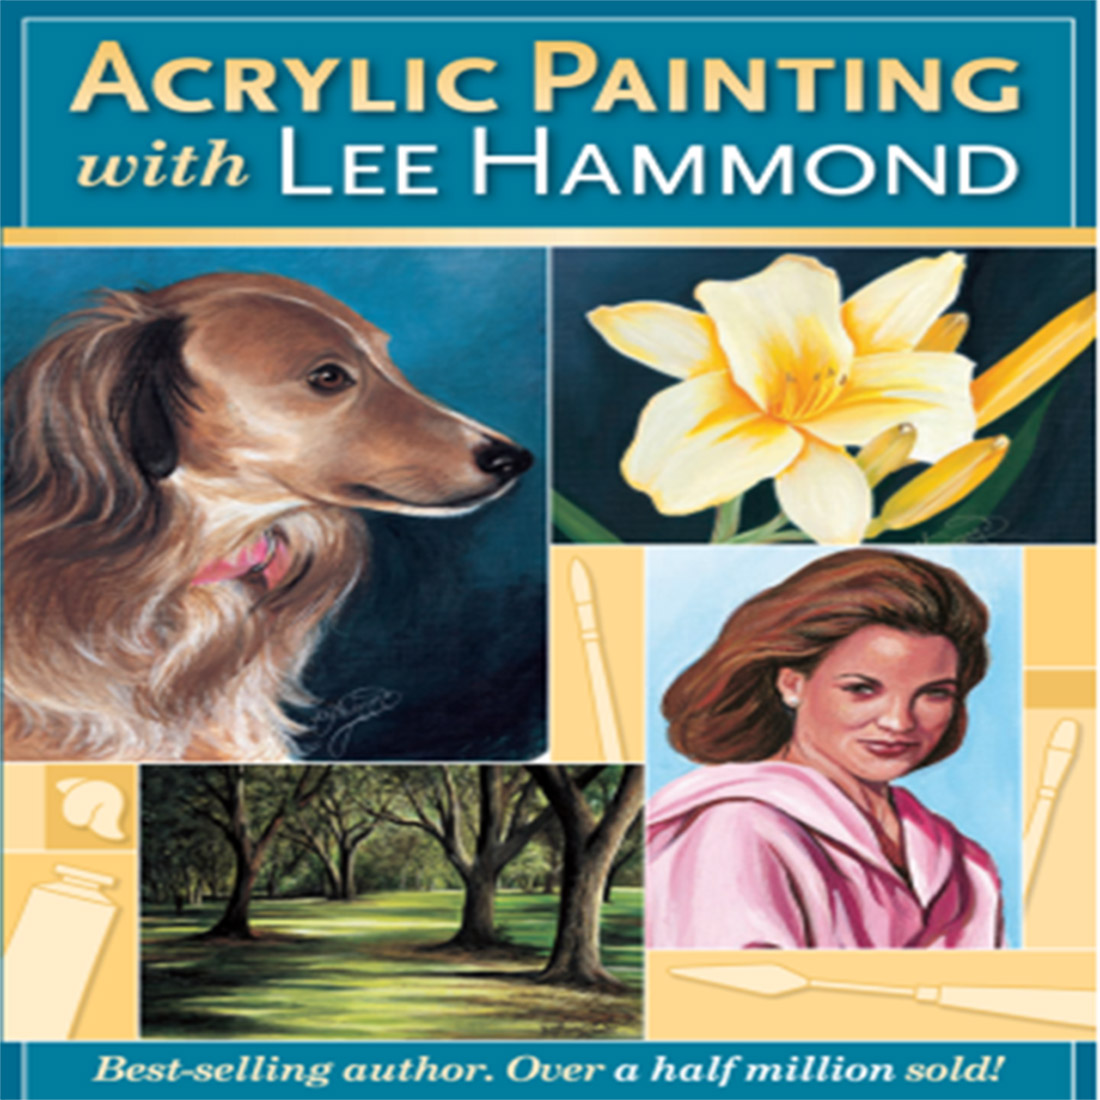 Acrylic painting with Lee Hammondpdf cover image.